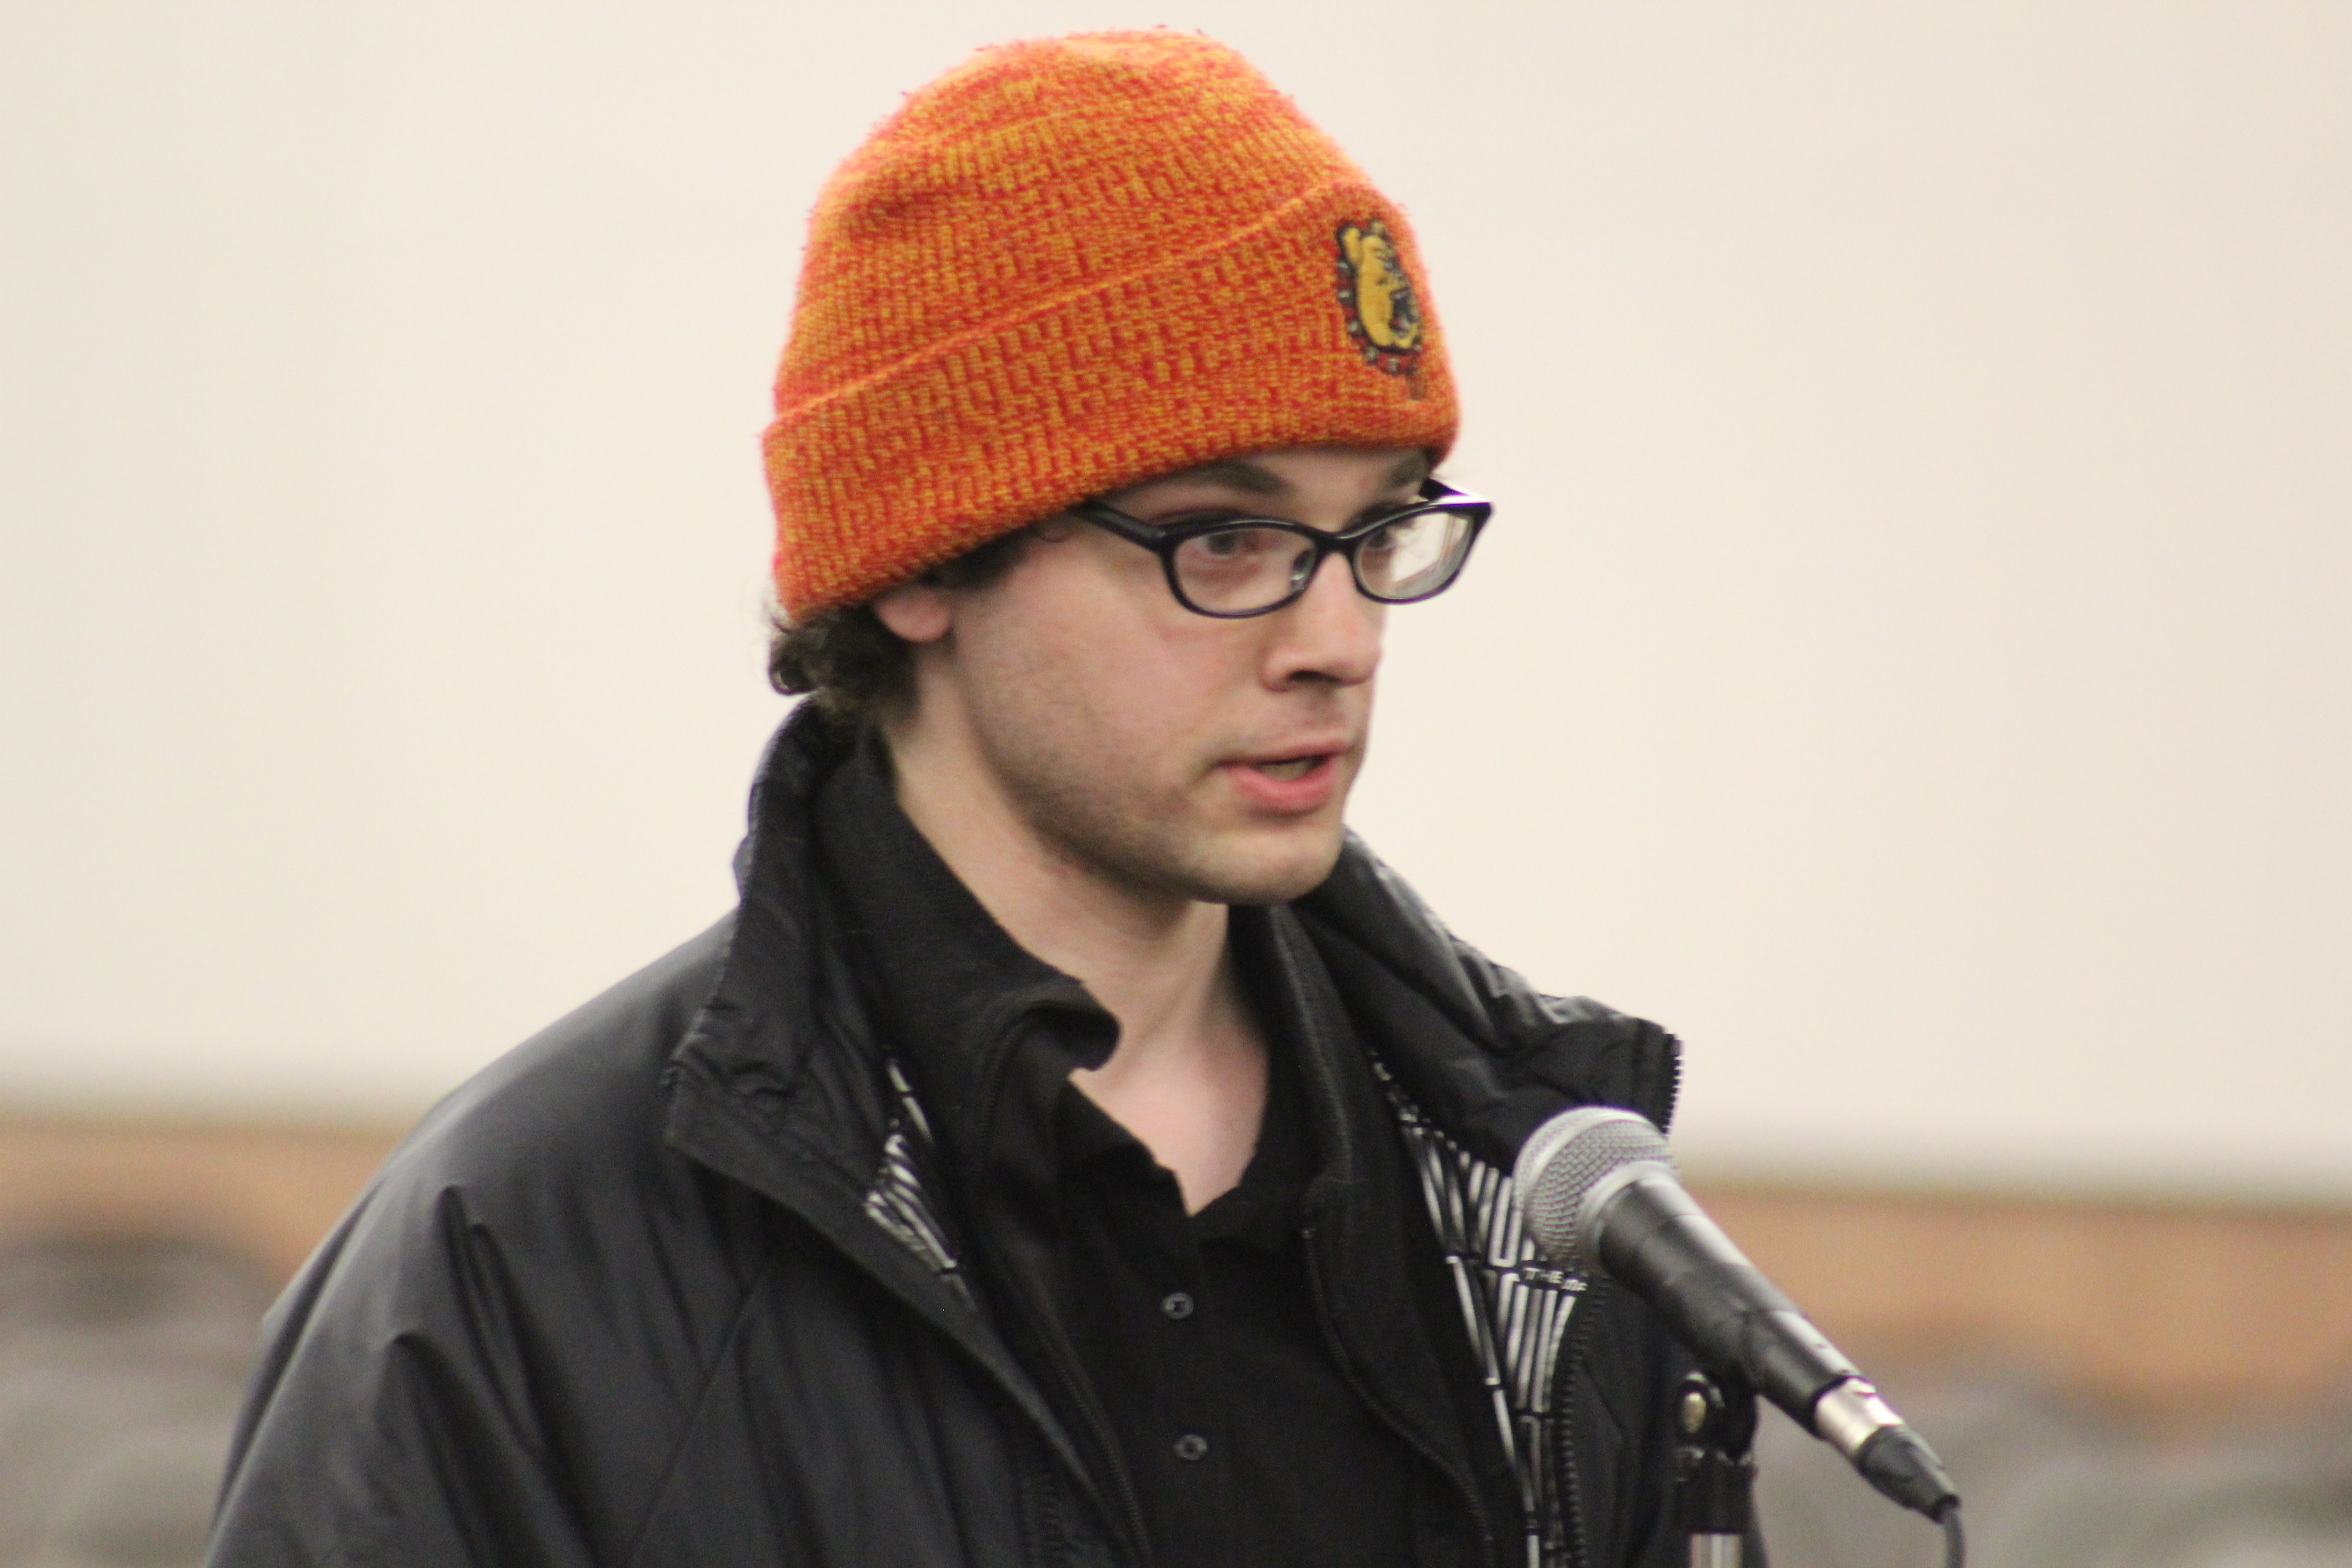 Former Ferris student and Big Rapids resident Justin Macauley was motivated to speak on the topic after following protests at Standing Rock, North Dakota.